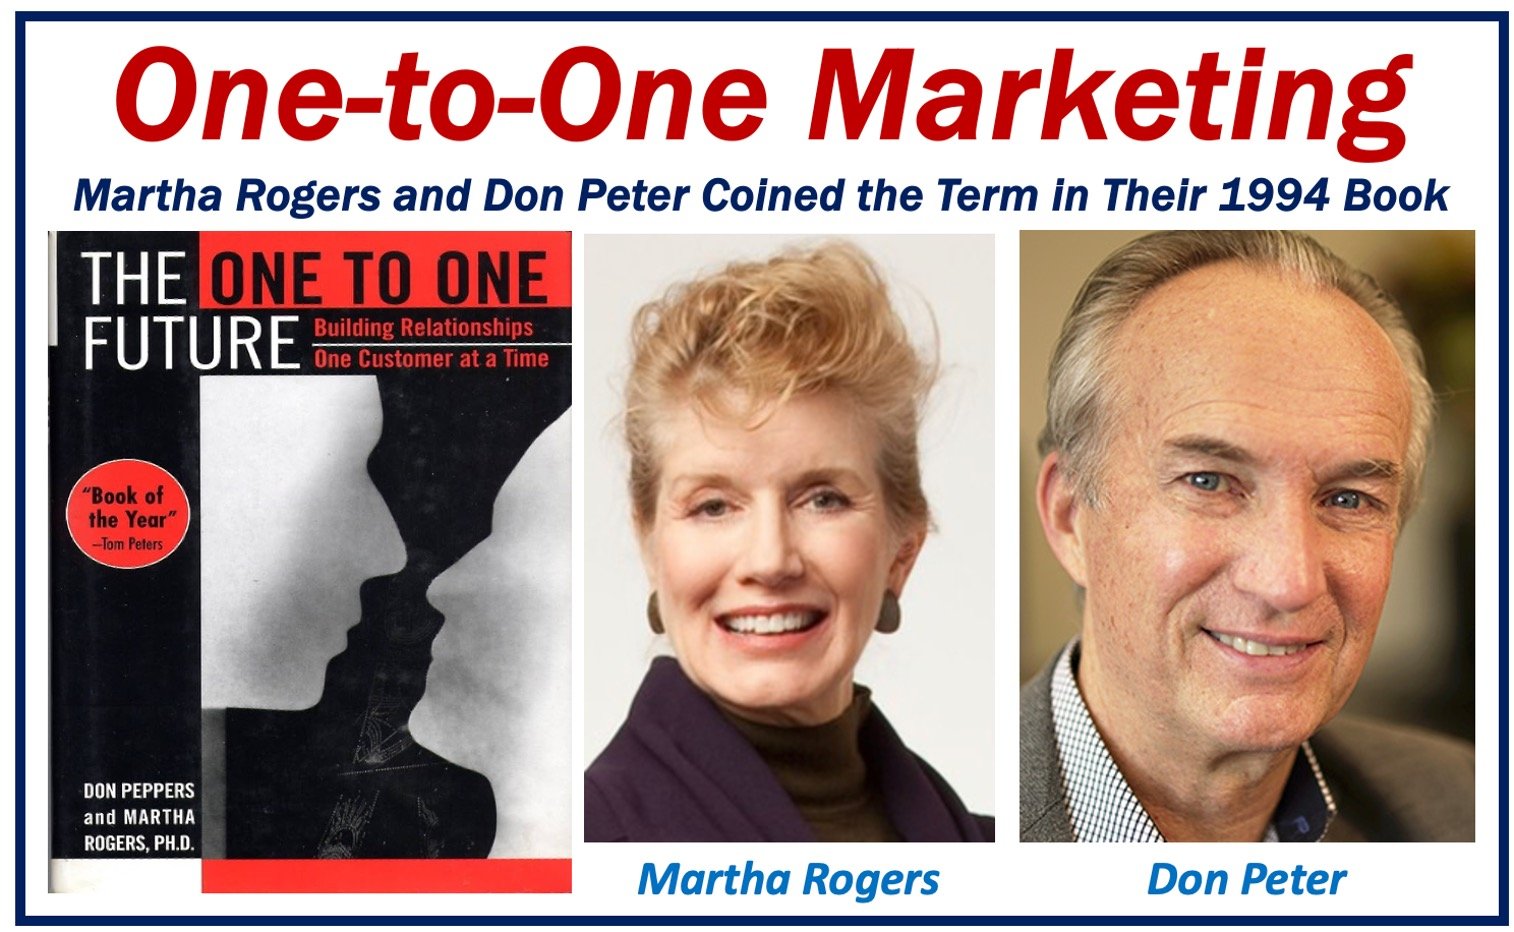 Authors who coined the term One-to-One Marketing